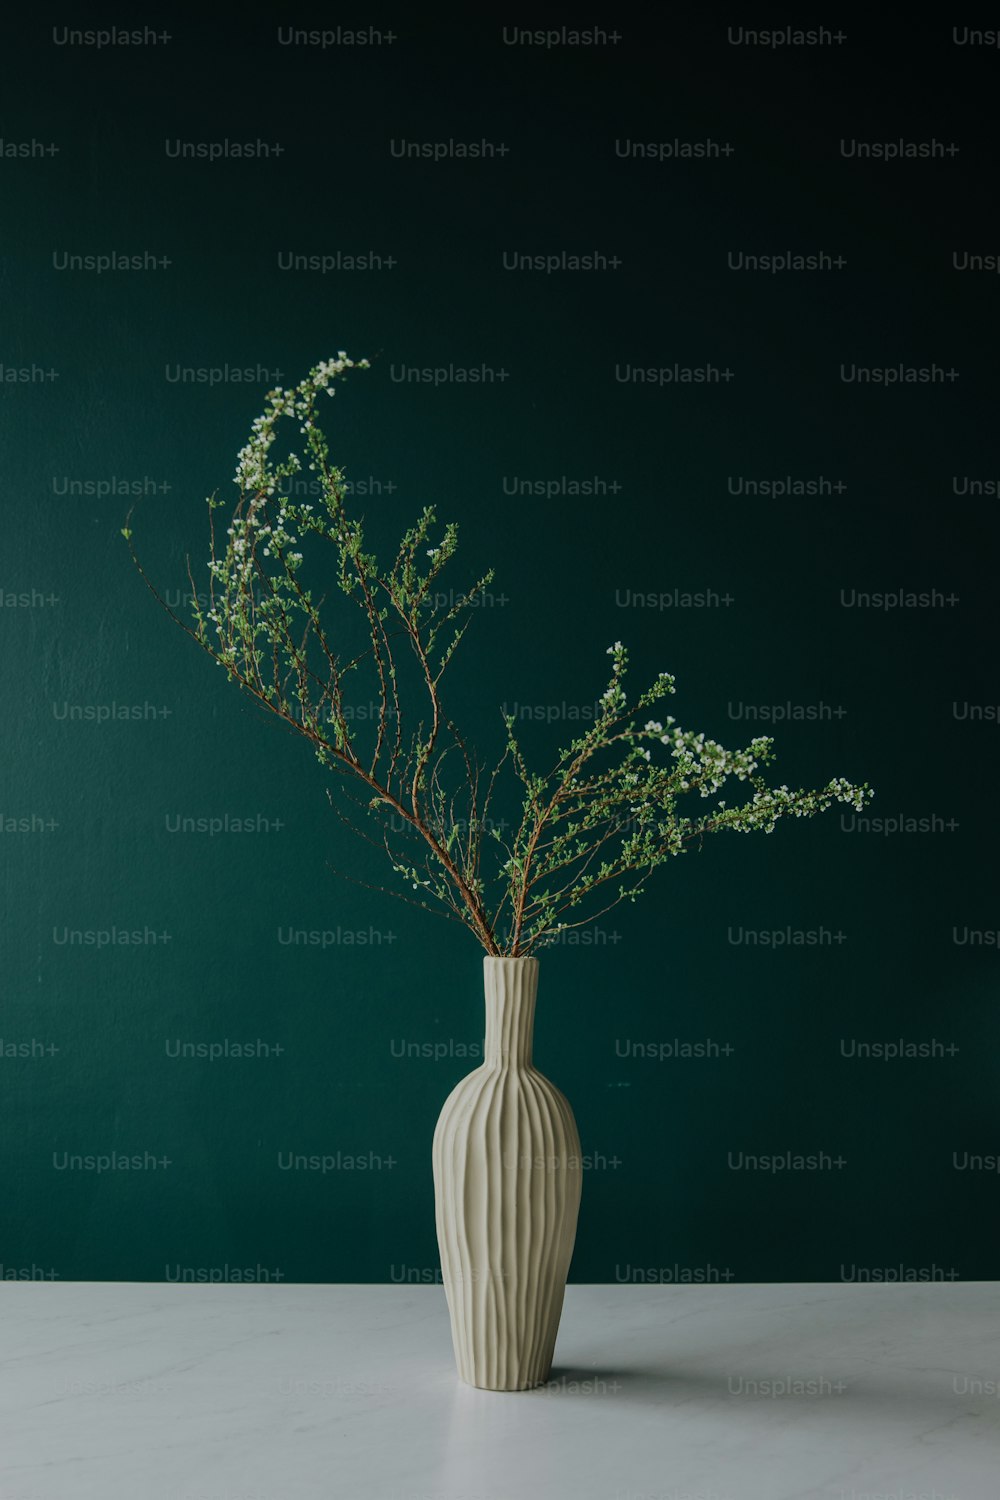 a vase with a plant in it on a table